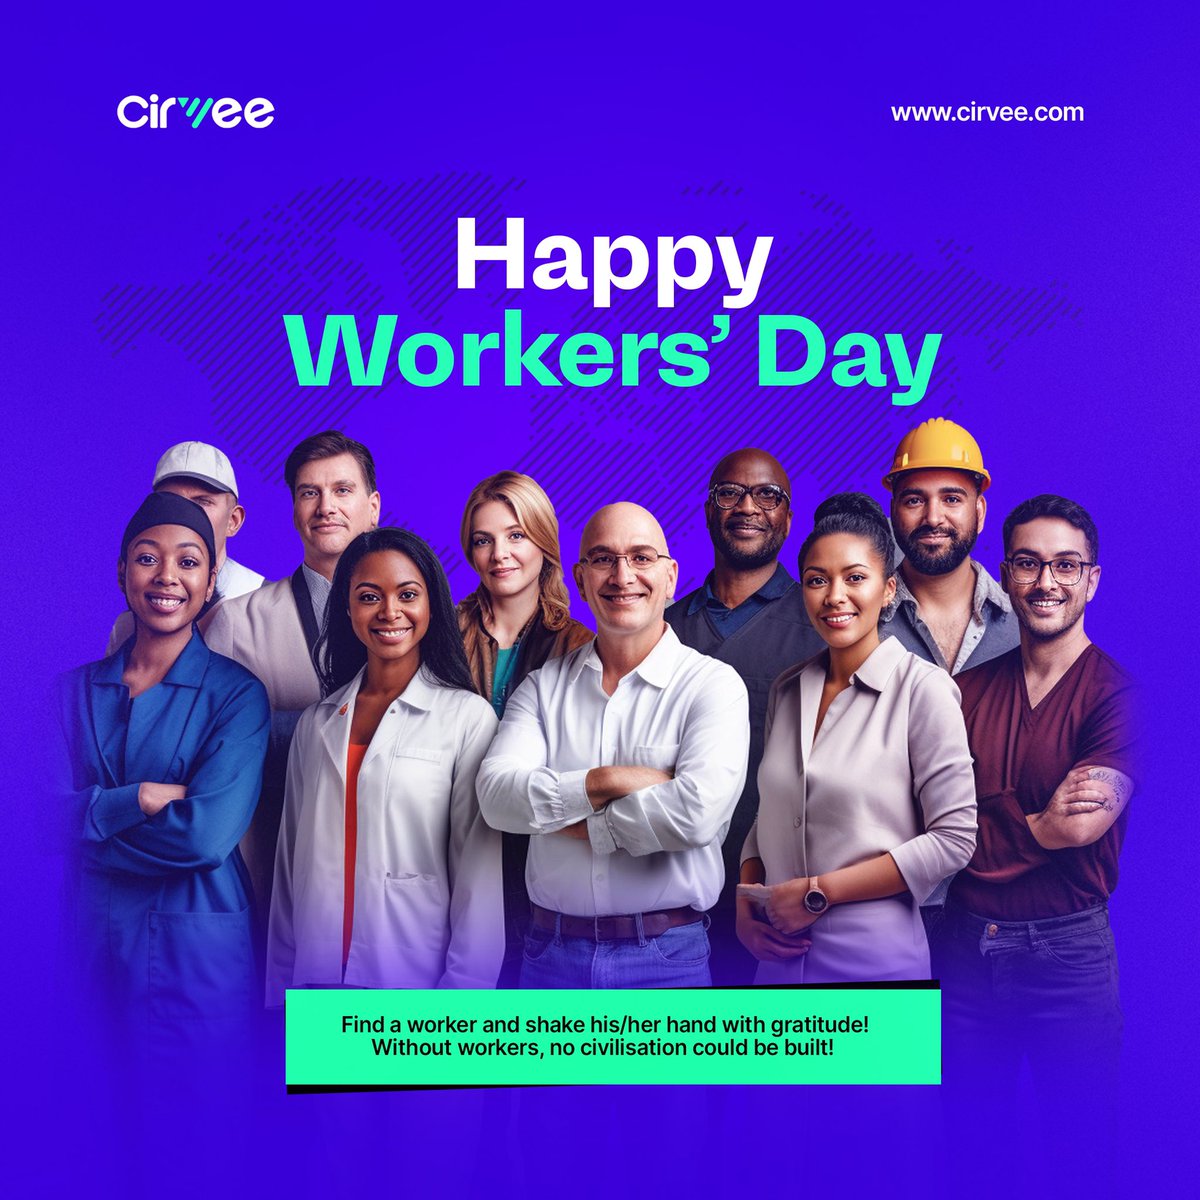 Cheers to the ones who keep the wheels turning, moving, and helping the world progress.
Especially the ones who keep the gears turning at Cirvee, who help nurture the next generation of world tech leaders.
Happy Workers' Day! #WorkersDay #techschool #learntech